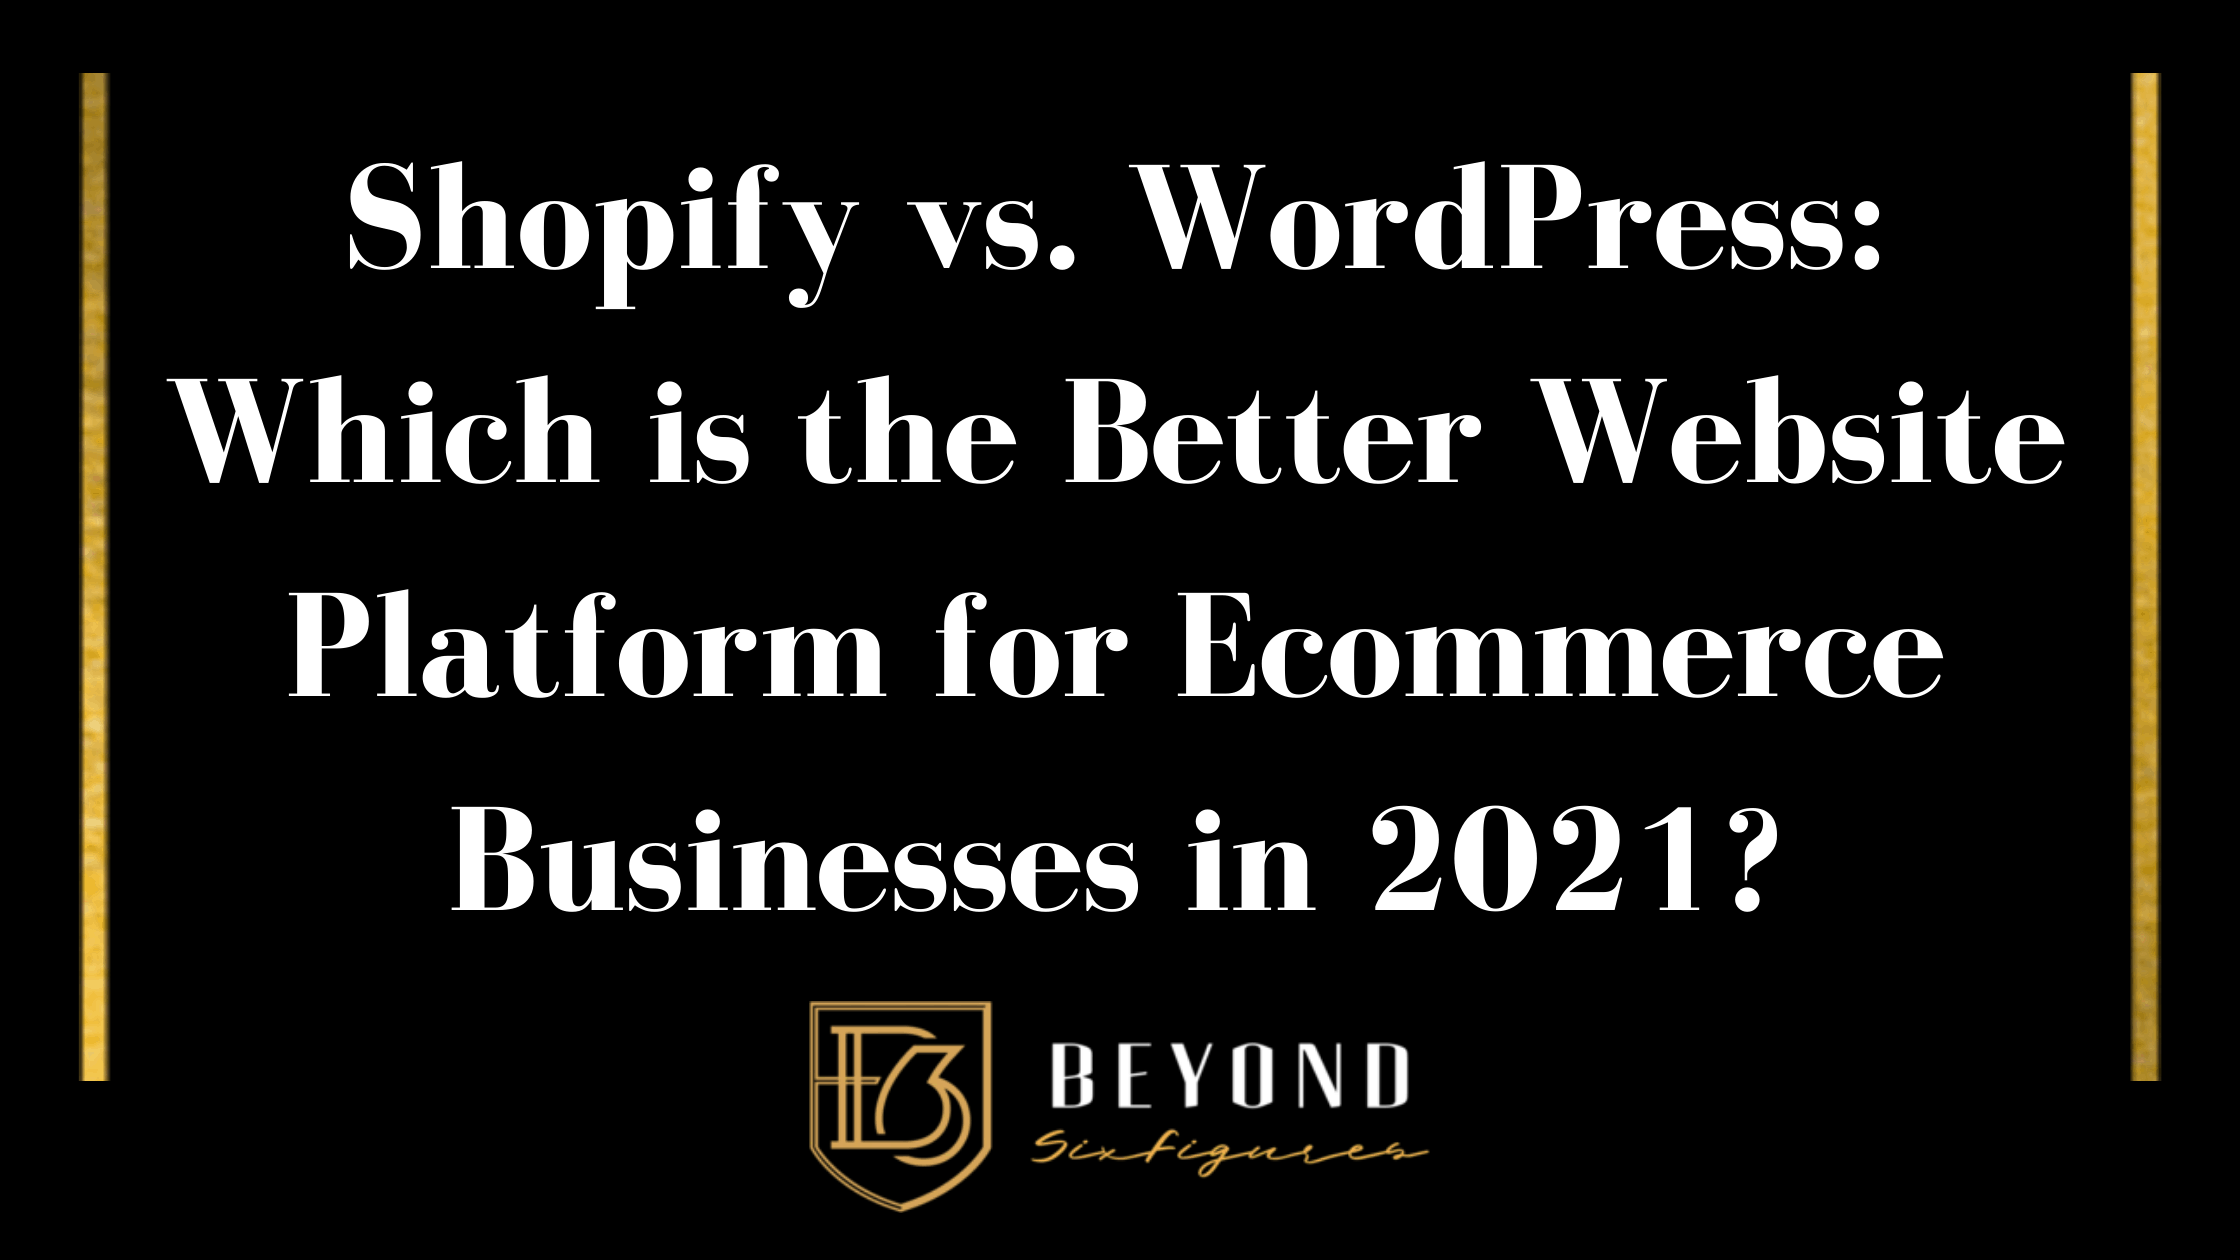 Shopify vs. WordPress: Which is the Better Website Platform for Ecommerce Businesses in 2021?